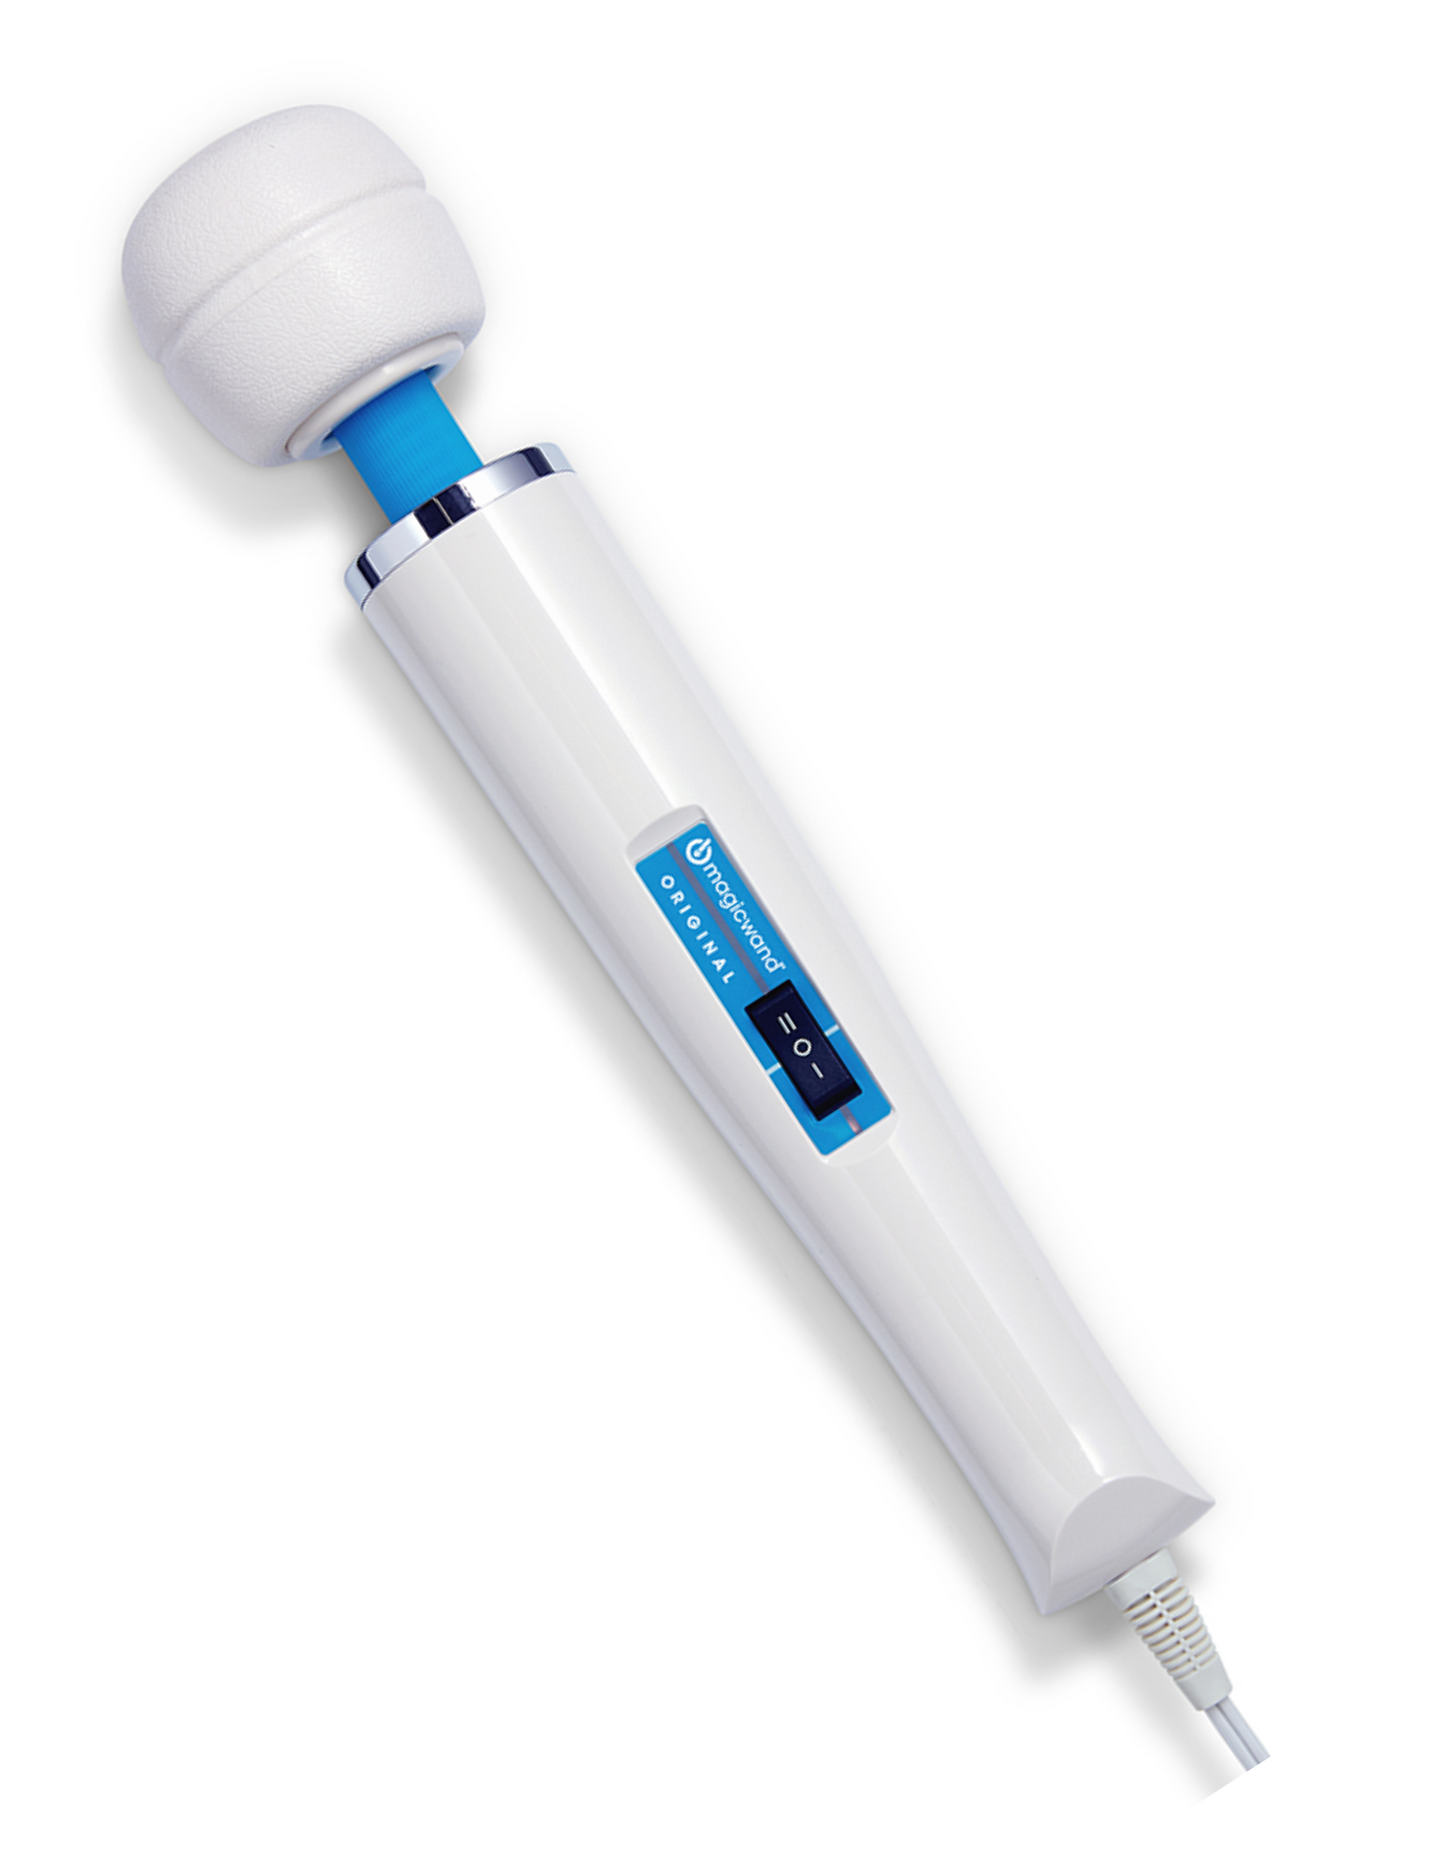 Over-head photo of the Hitachi Magic Wand Original Massager shows its control switch and plug-in cord.